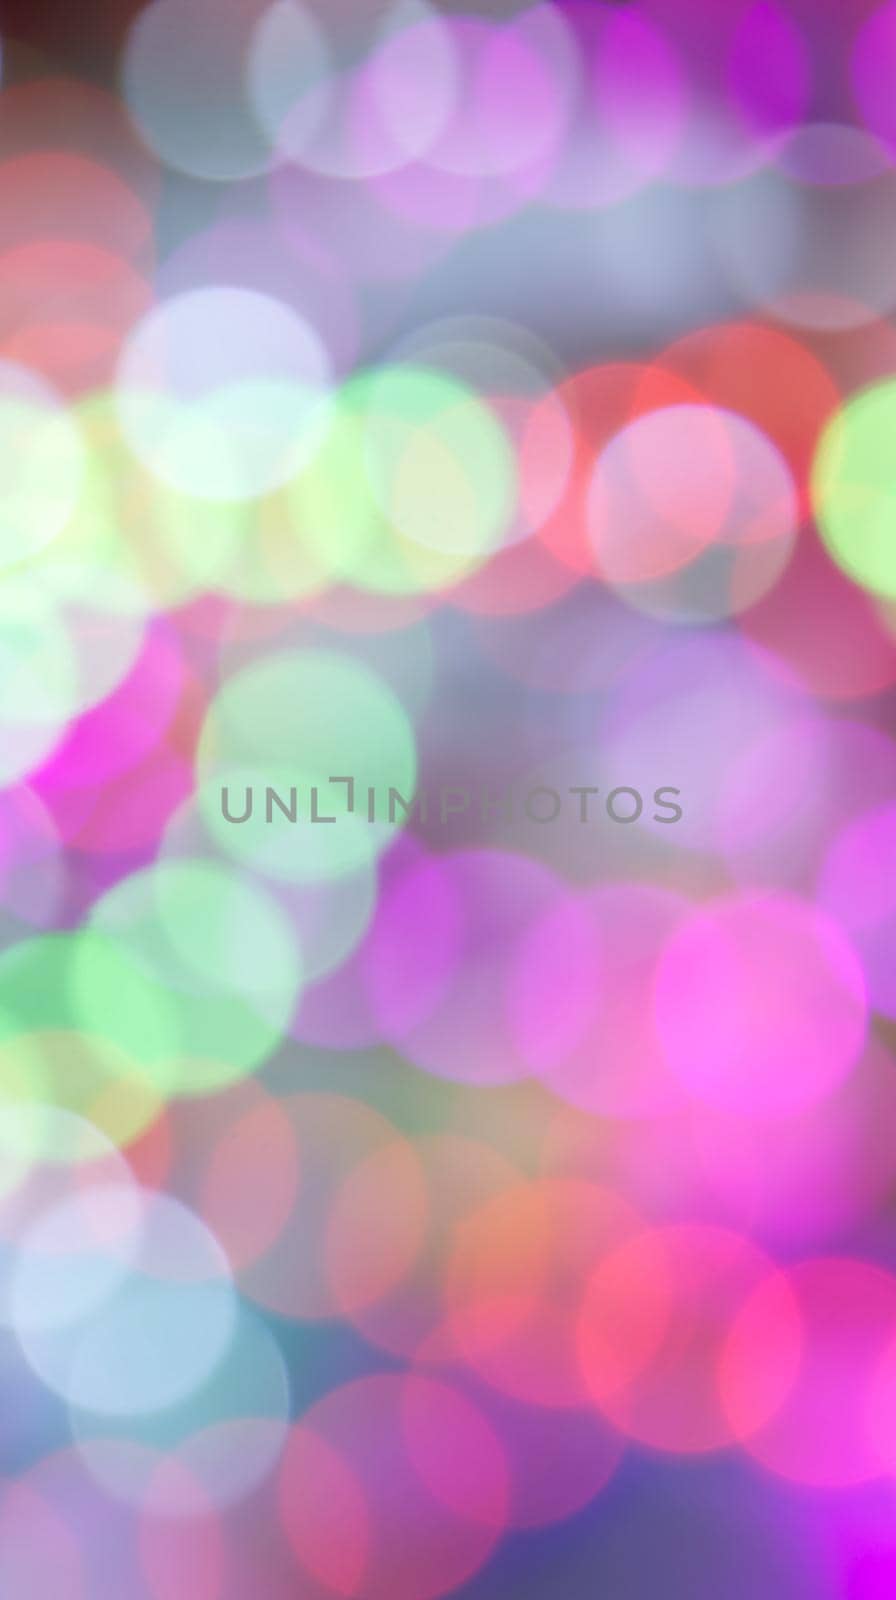 Vertical bokeh lights multicolored abstract fun.